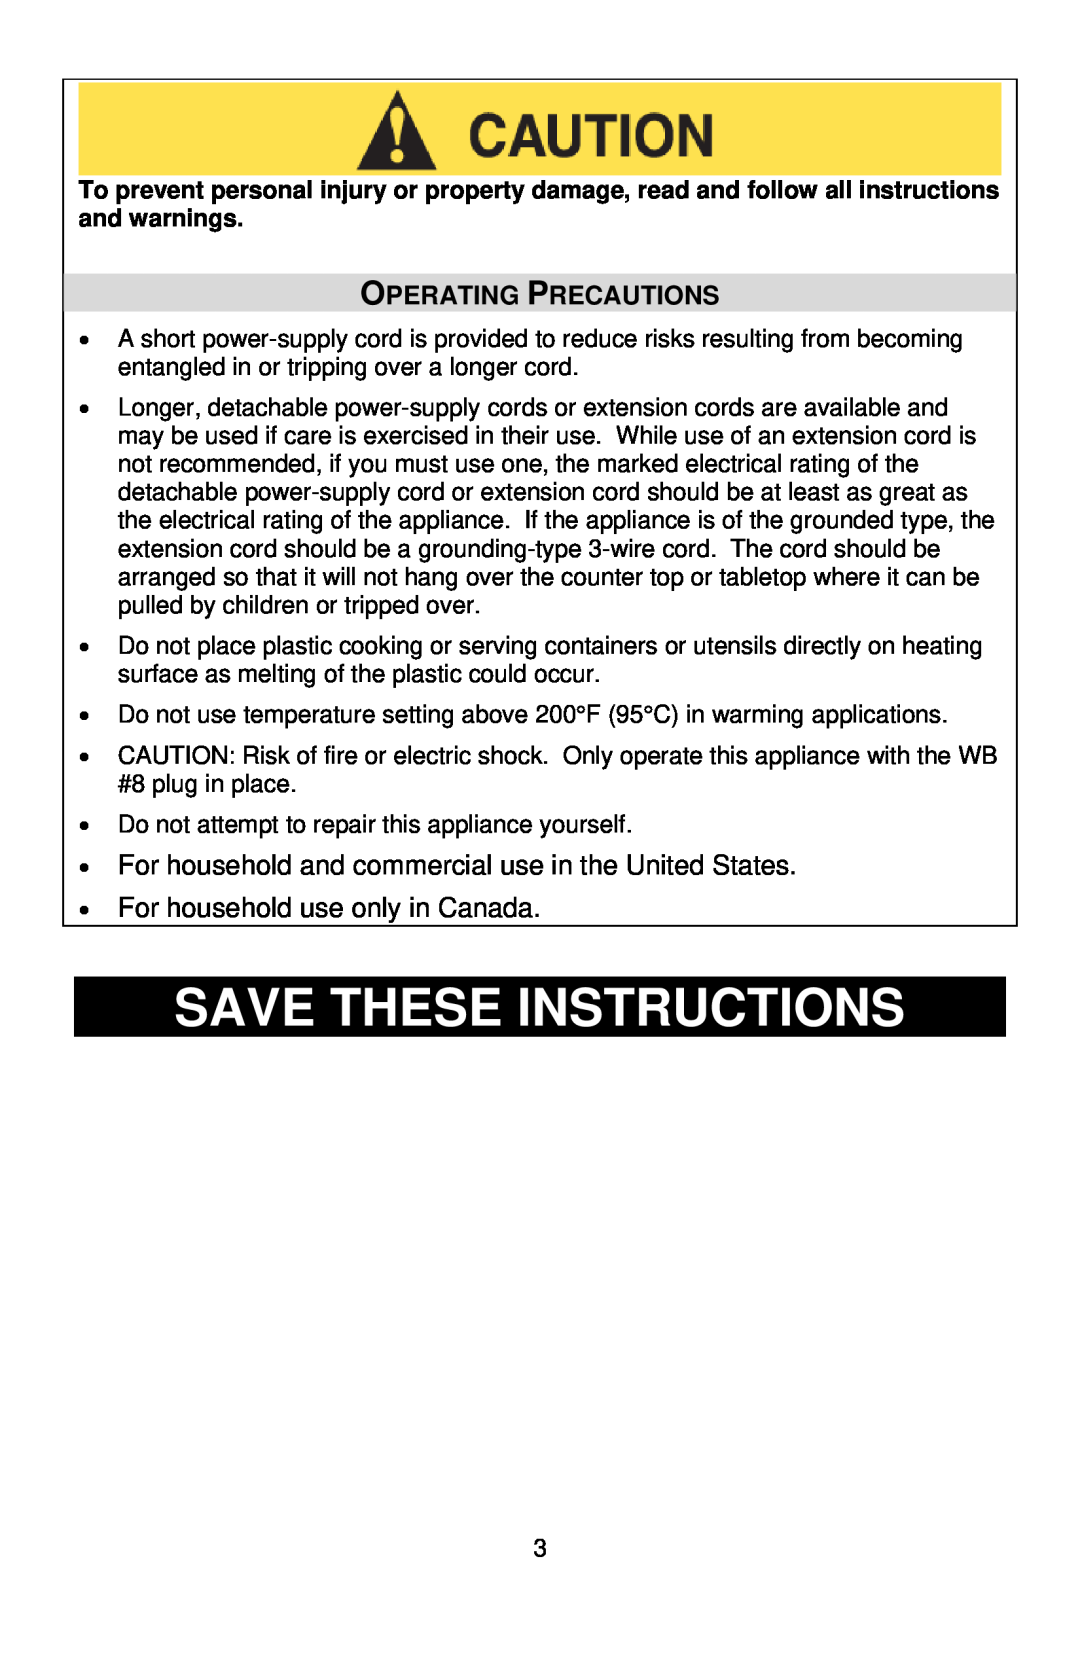 West Bend L5745A instruction manual Save These Instructions, Operating Precautions, For household use only in Canada 